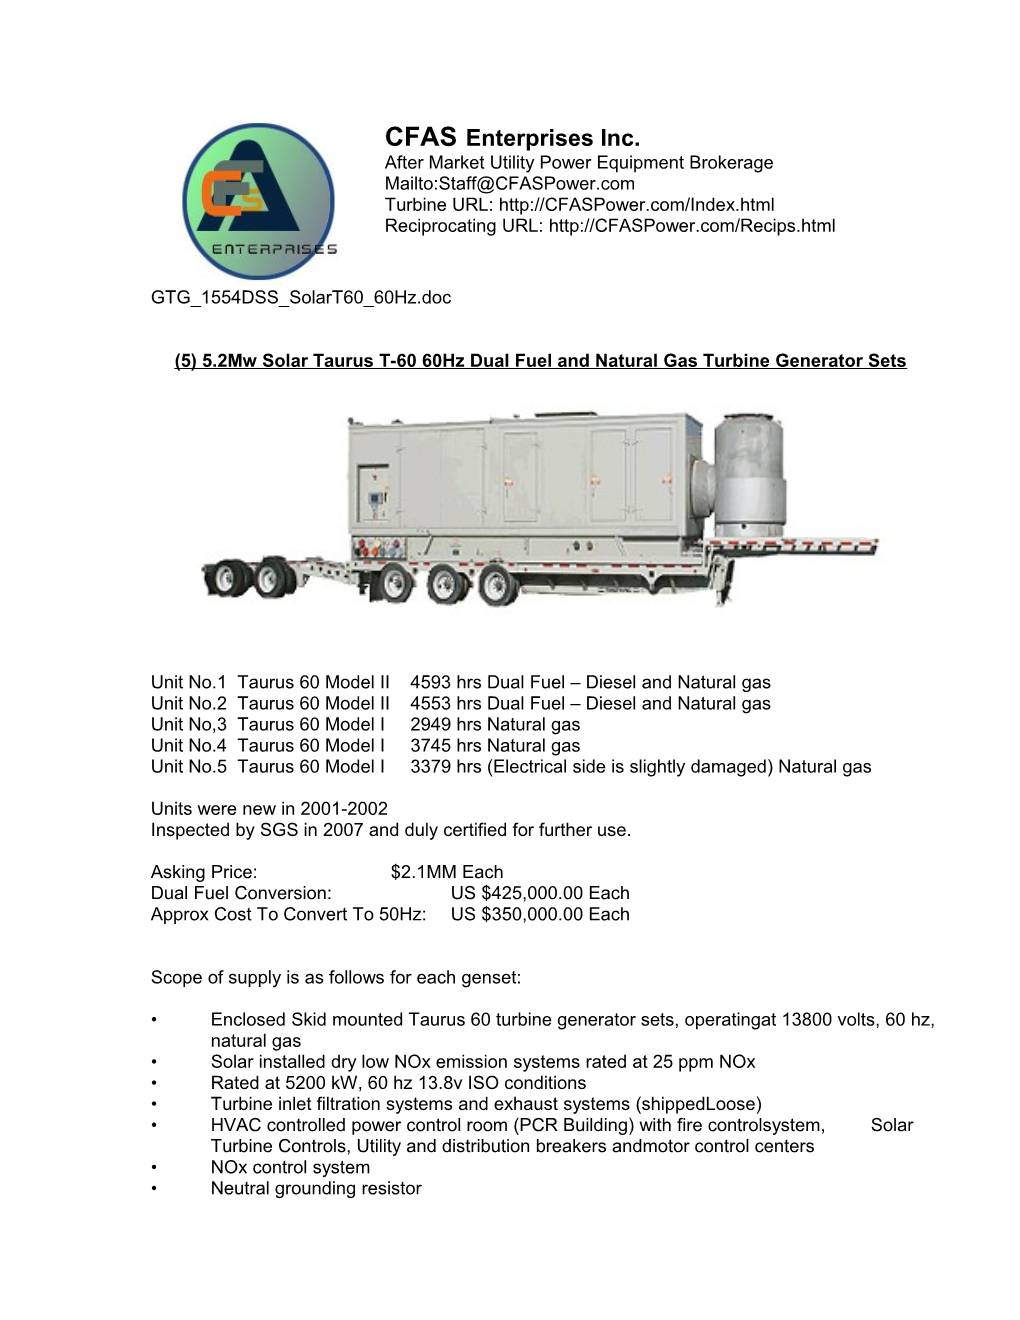 Please Find Enclosed Our Sales Proposal for Two (2) Solar Taurus 1-60 Gas